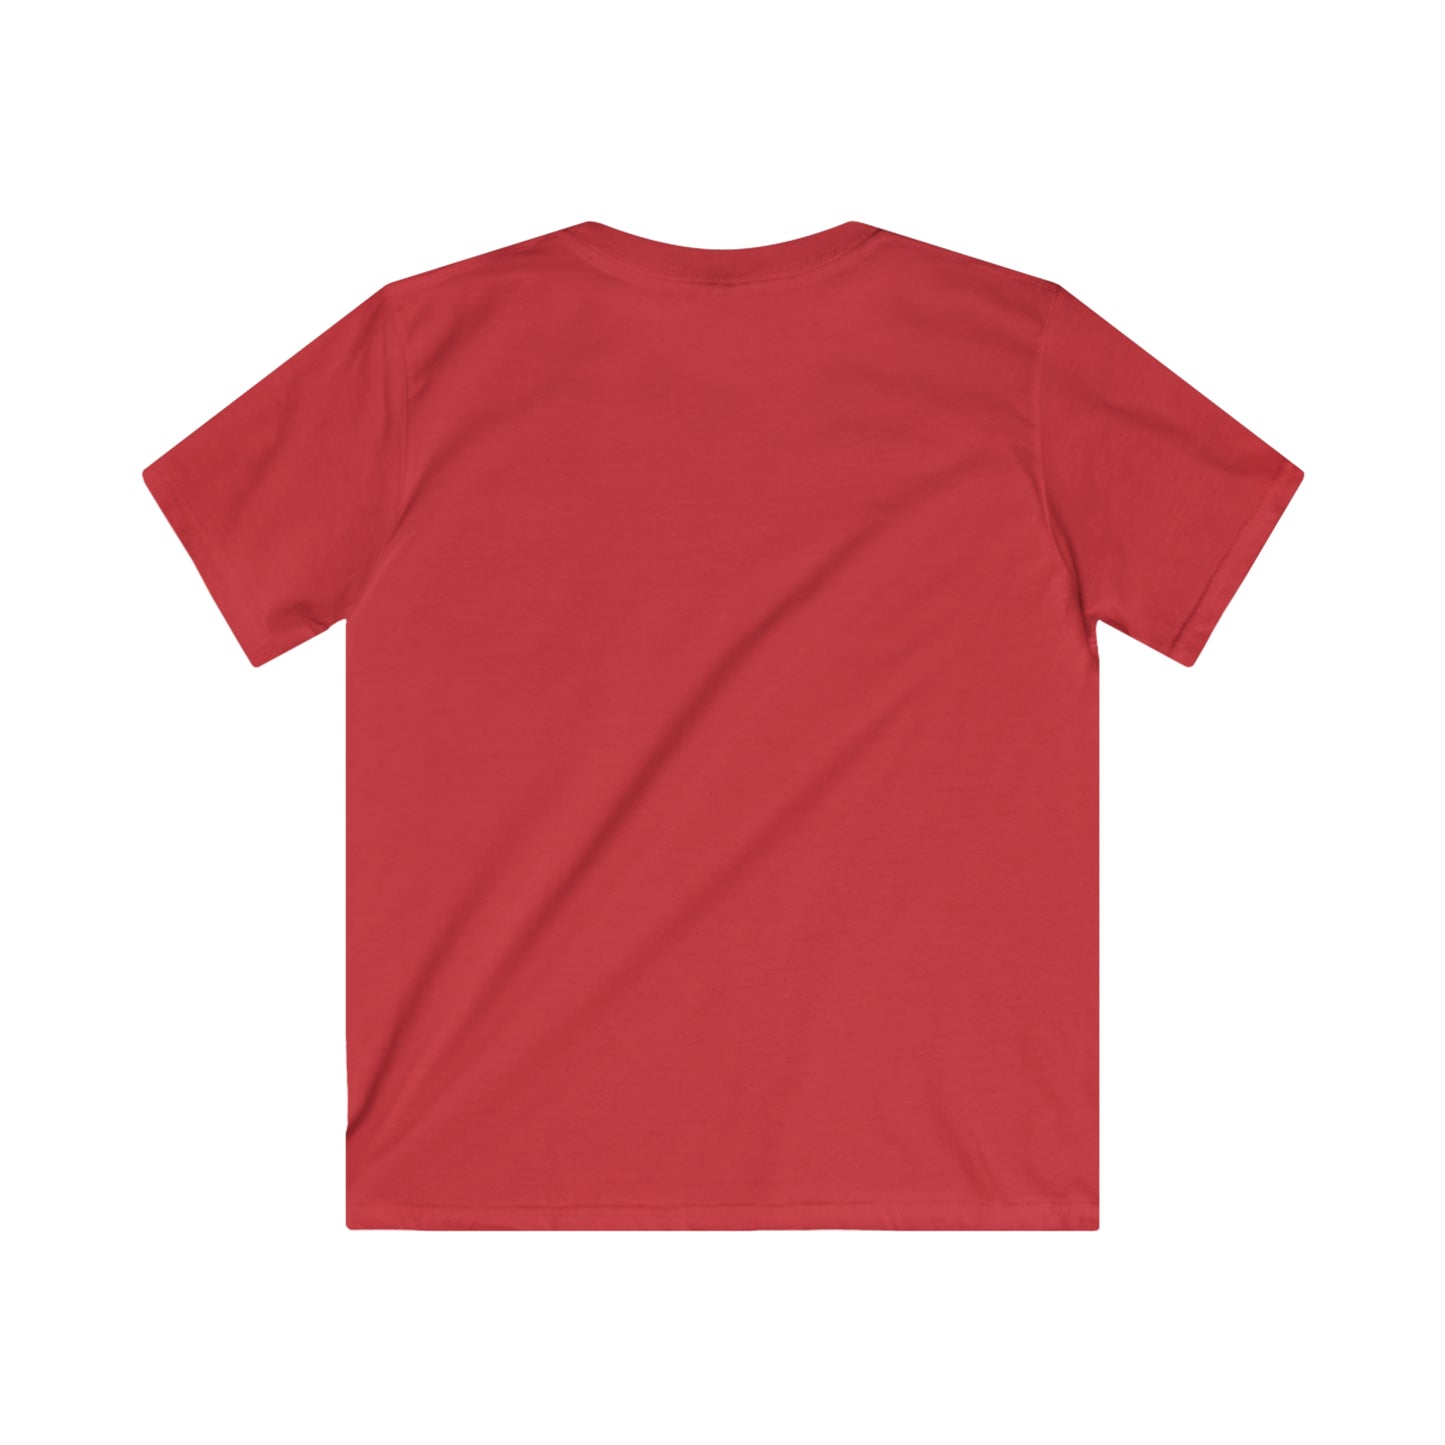 Explore The Outdoors. Kids Softstyle Tee